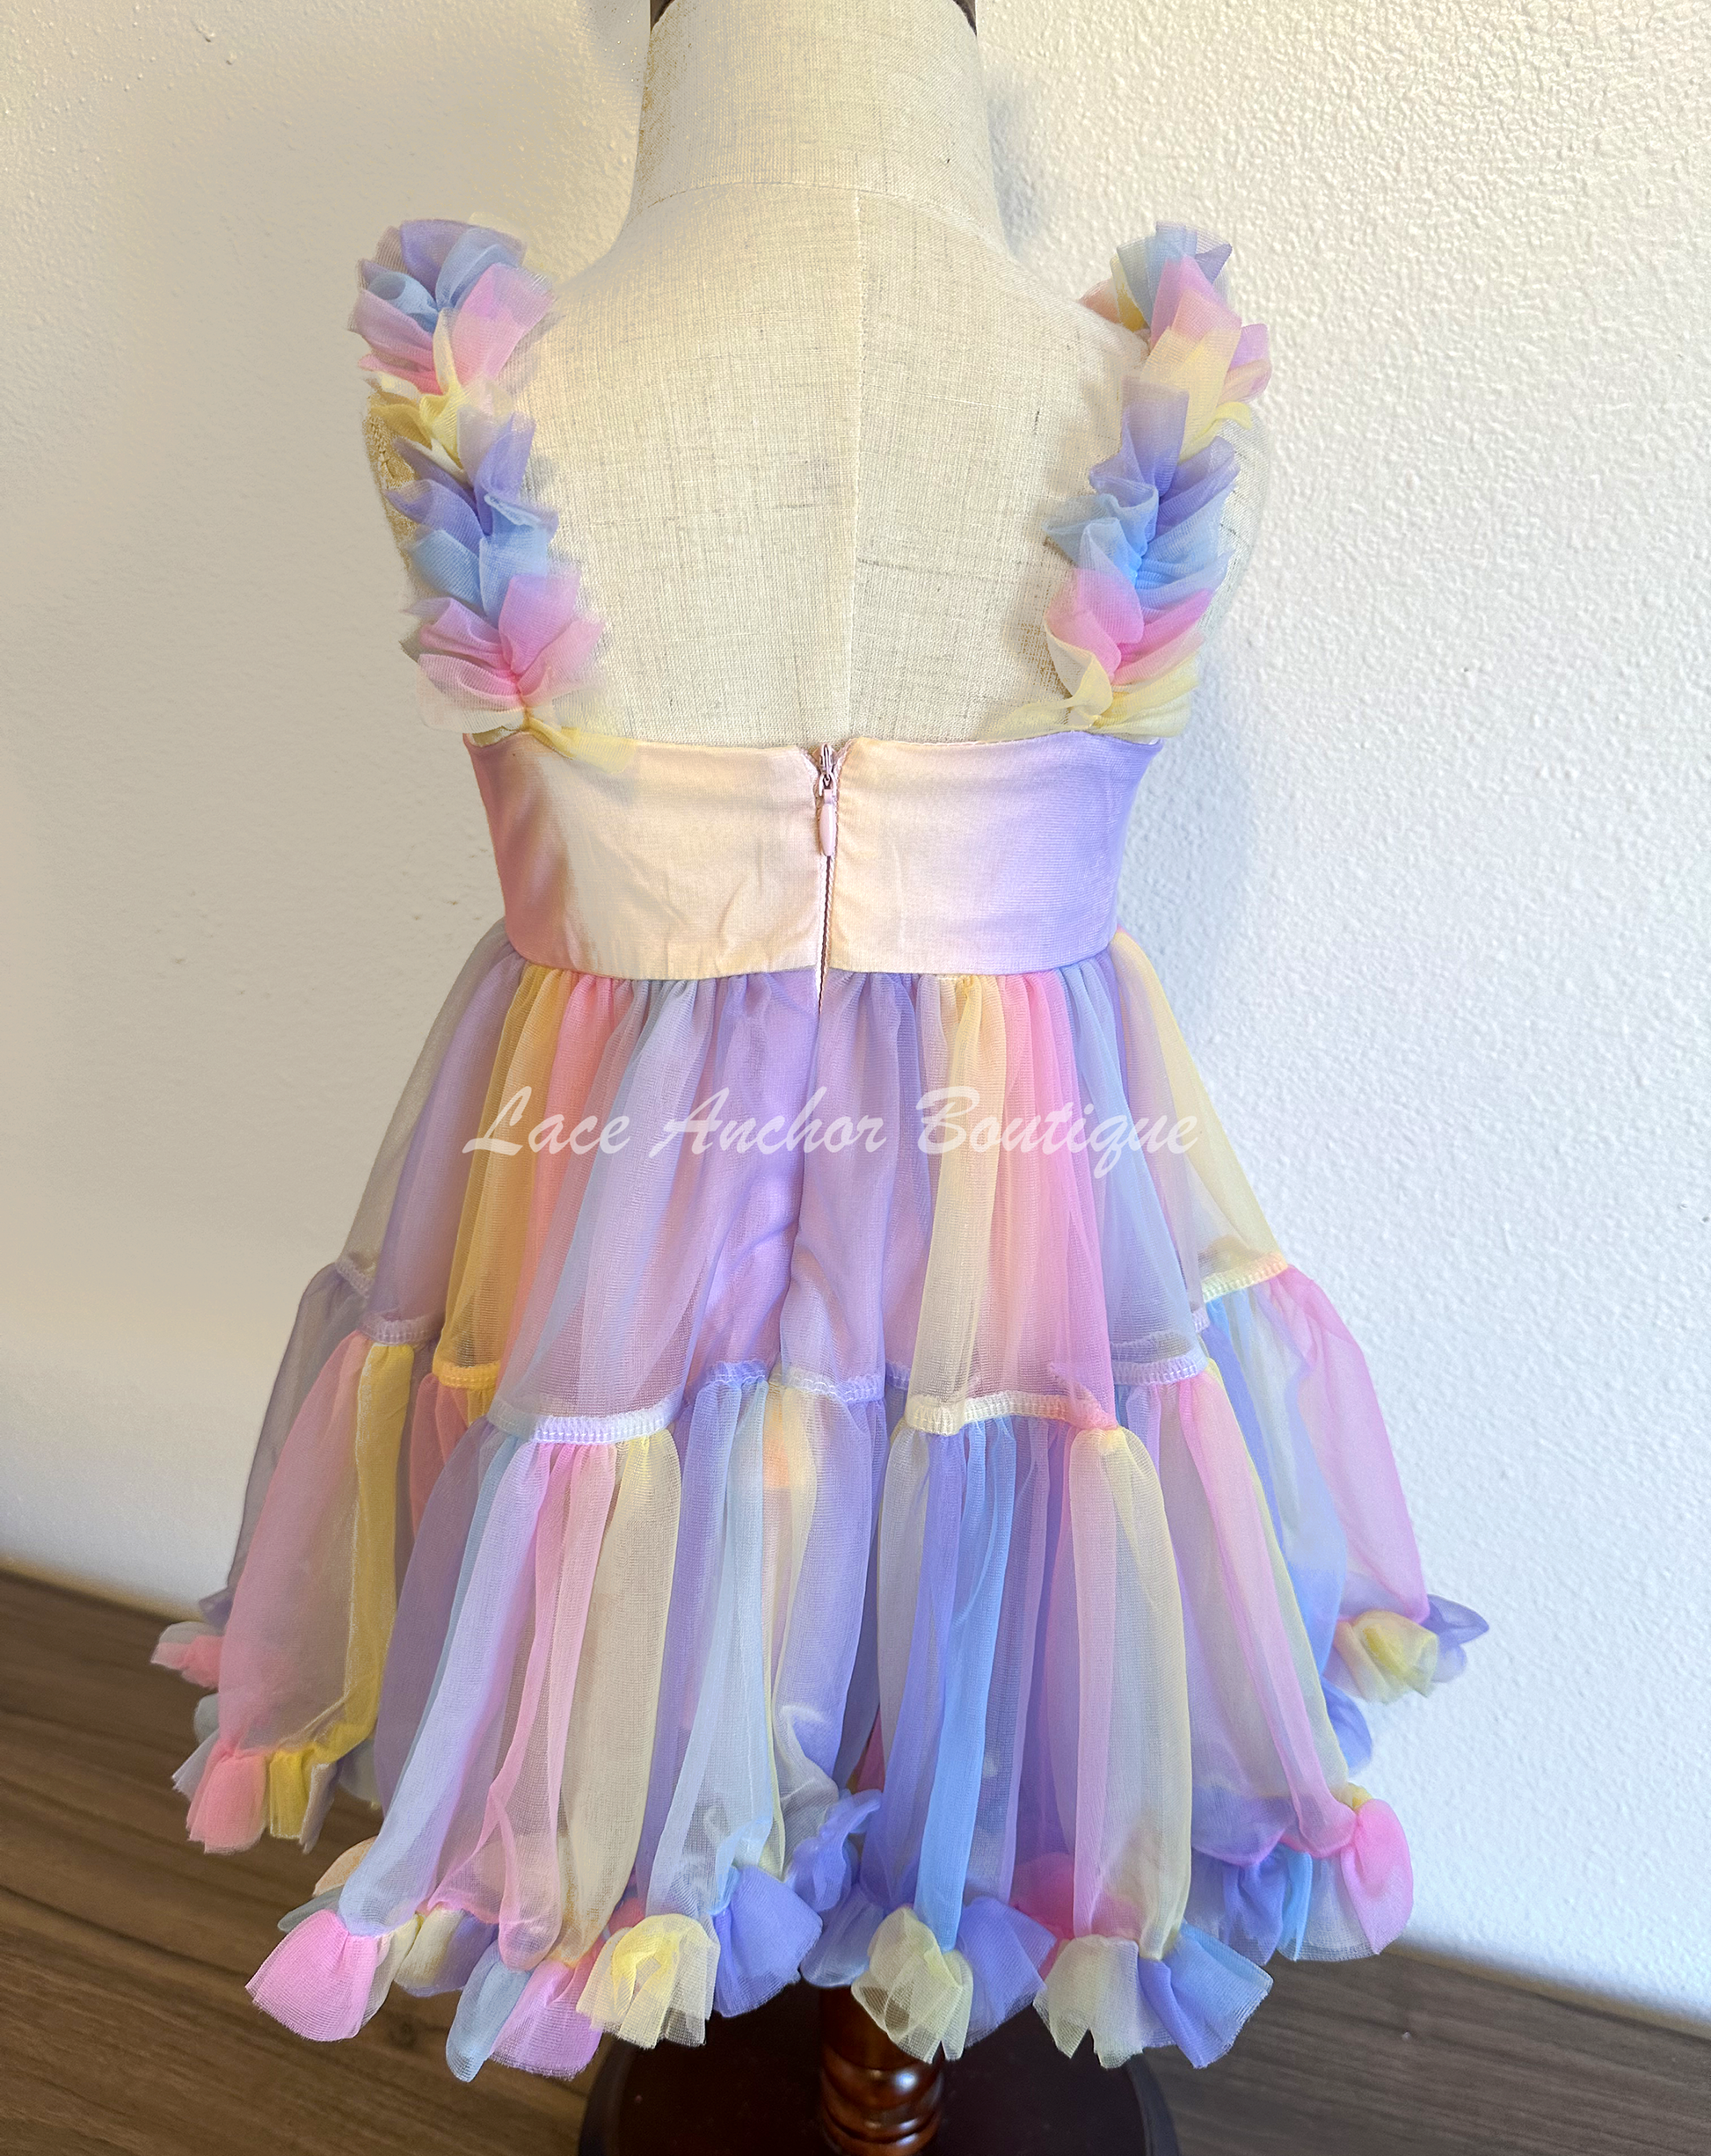 toddler youth girls pastel rainbow multi colored dress with pearl details and ruffle trim and straps. Unicorn colored theme birthday girl princess dress.